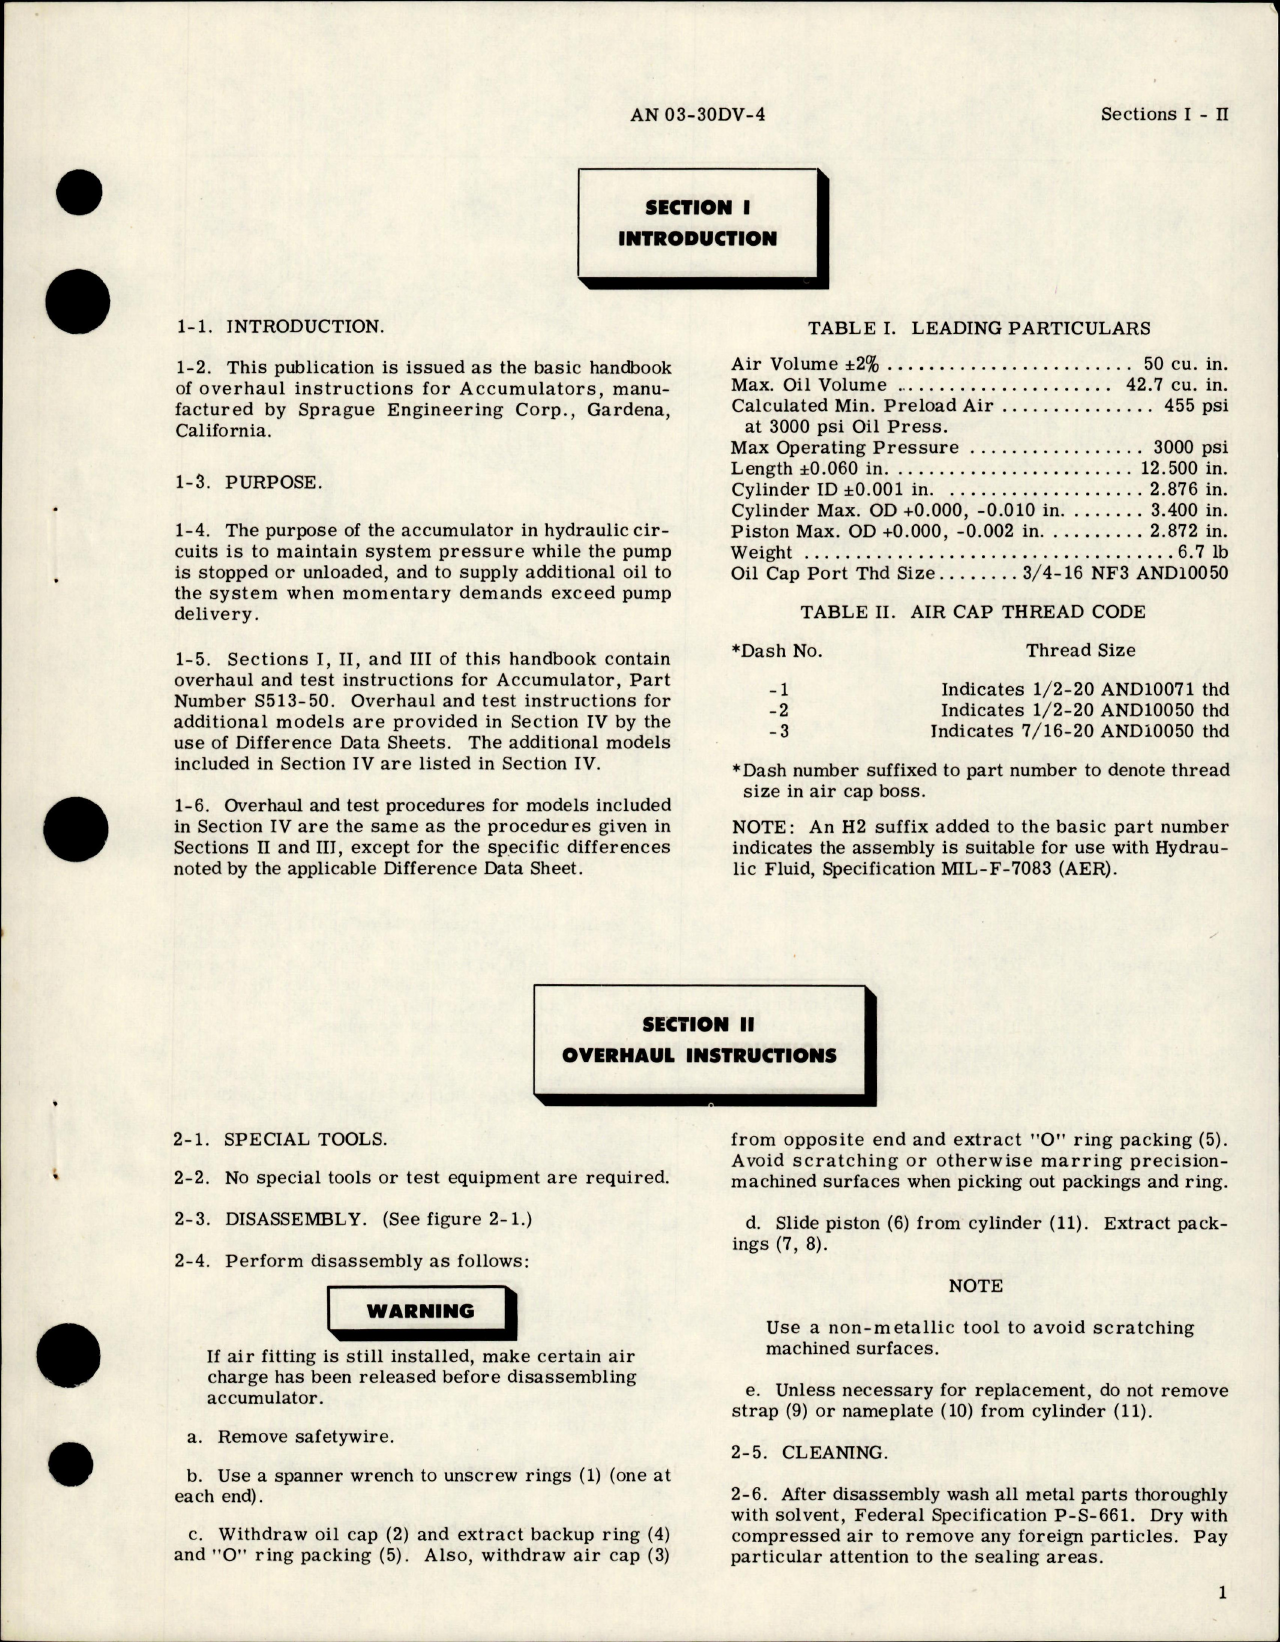 Sample page 5 from AirCorps Library document: Overhaul Instructions for Accumulators 